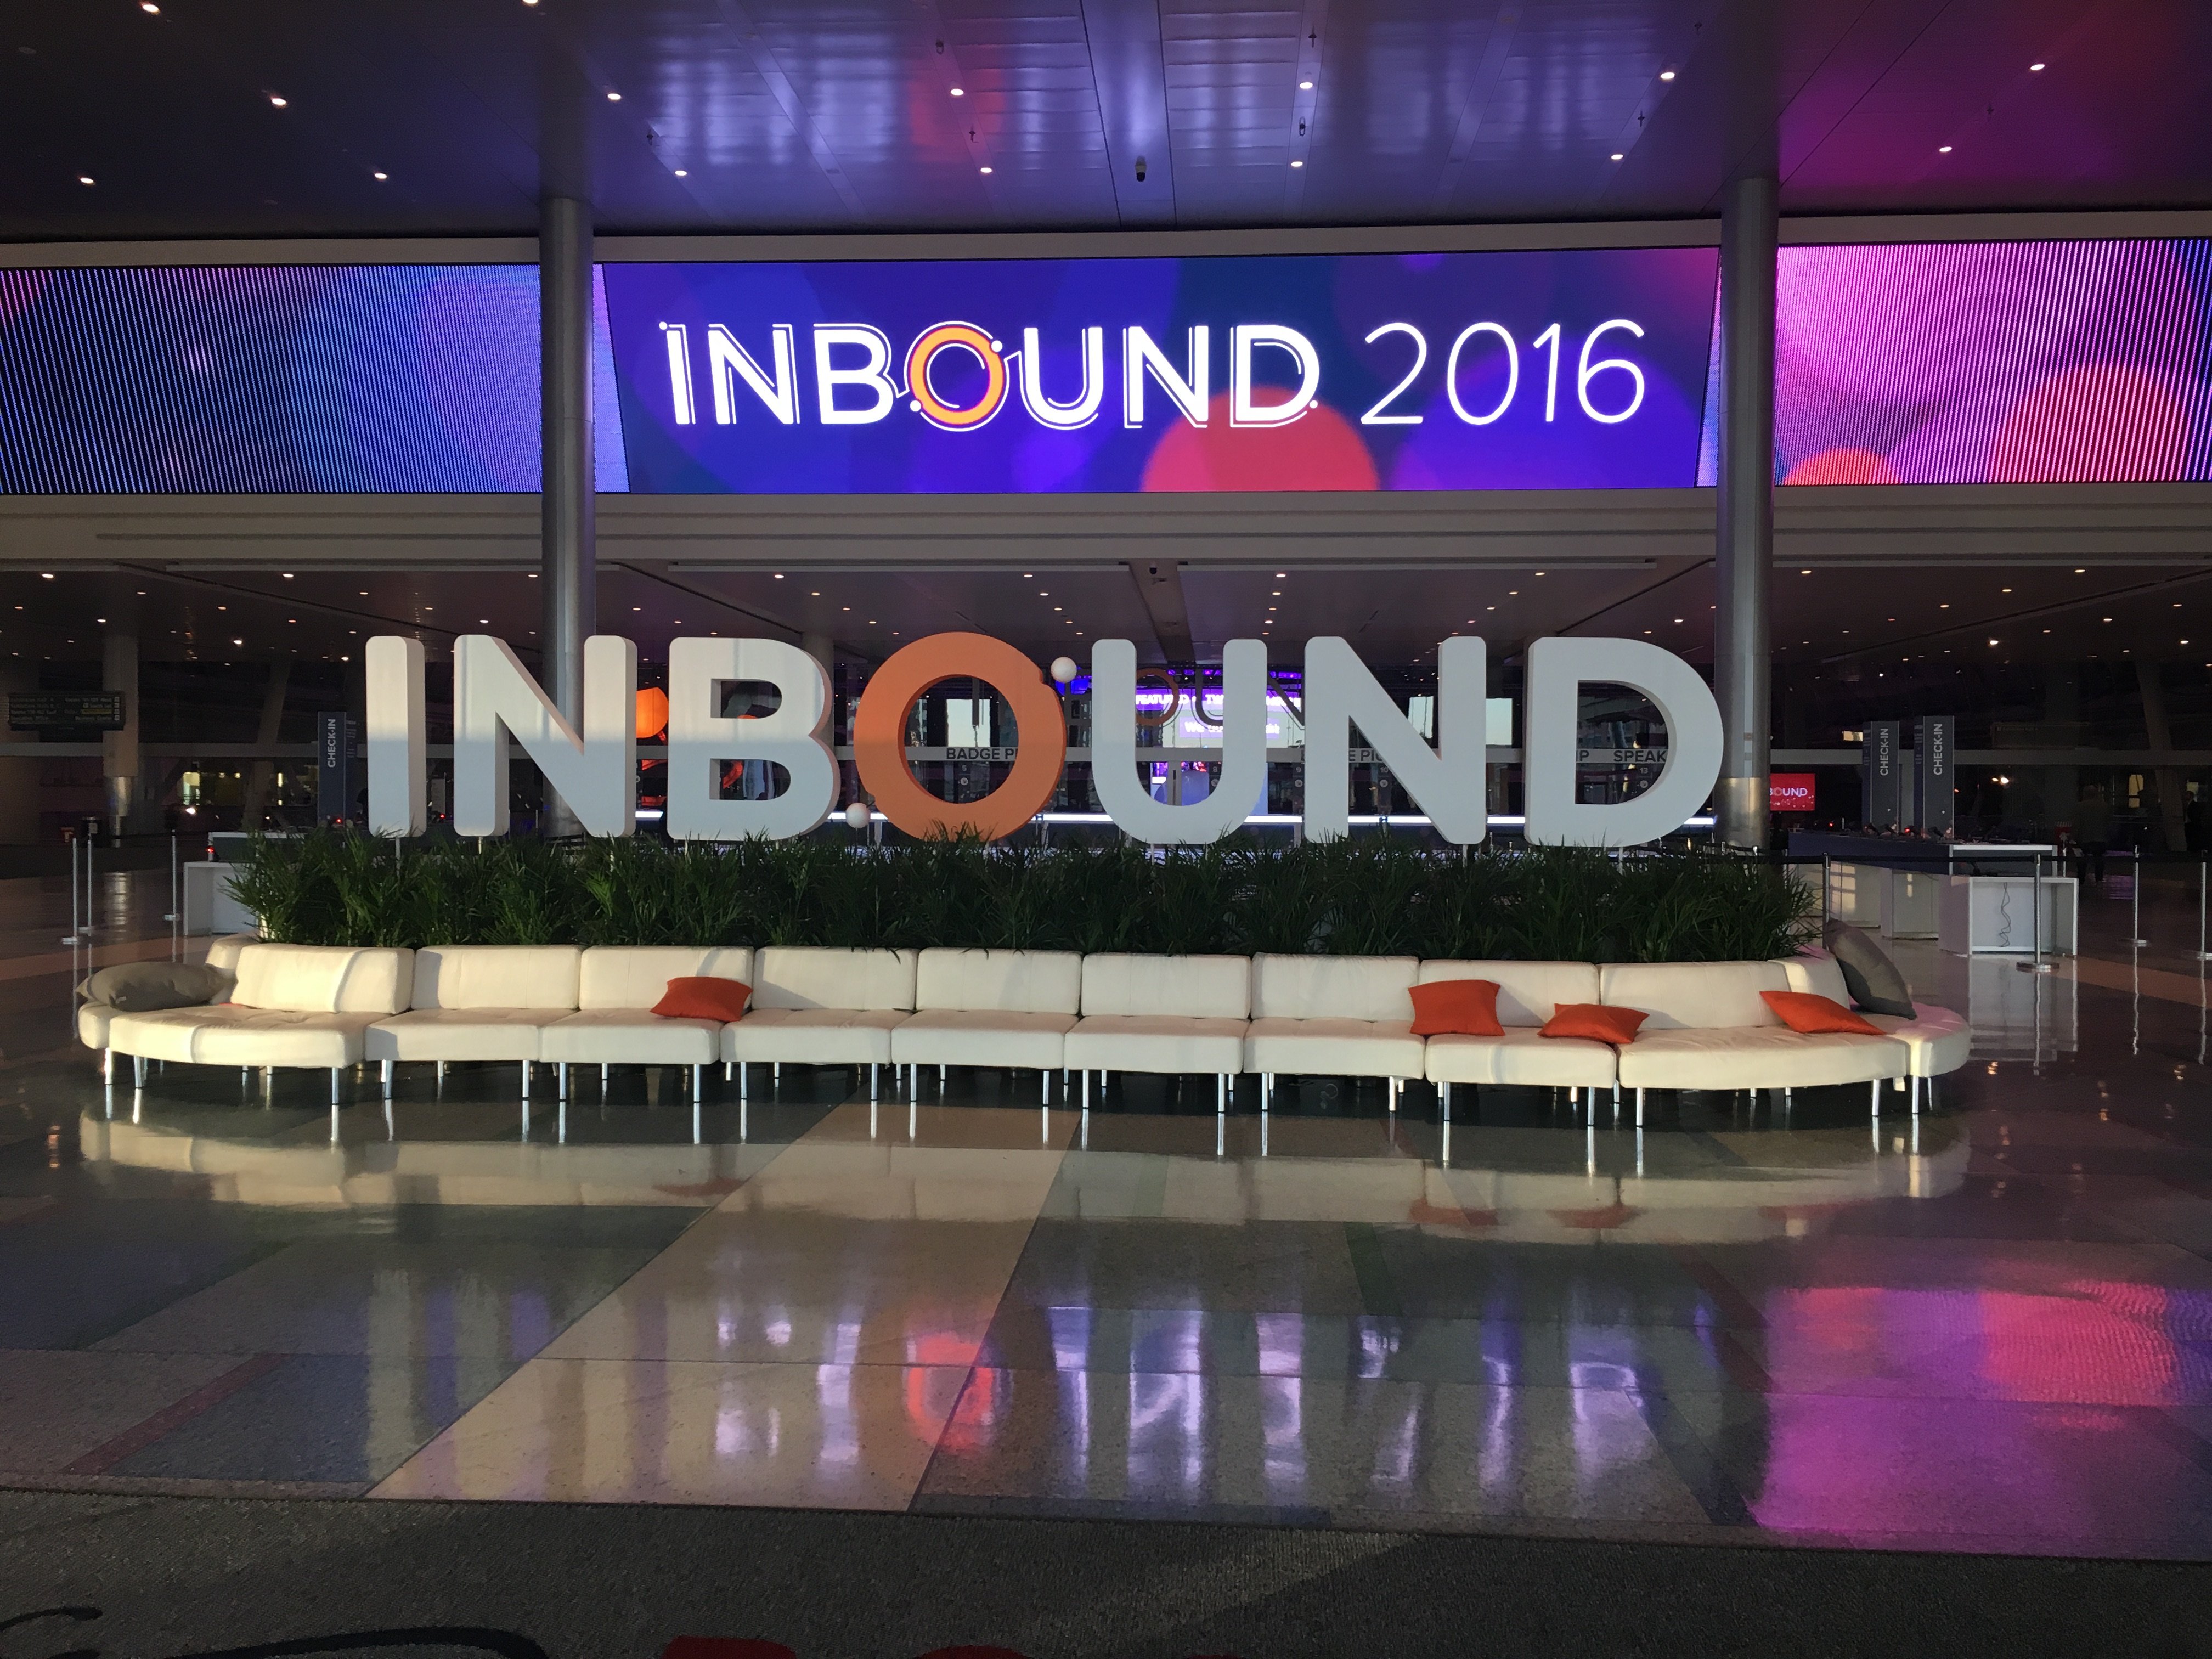 Our Favorite Moments From INBOUND 2016